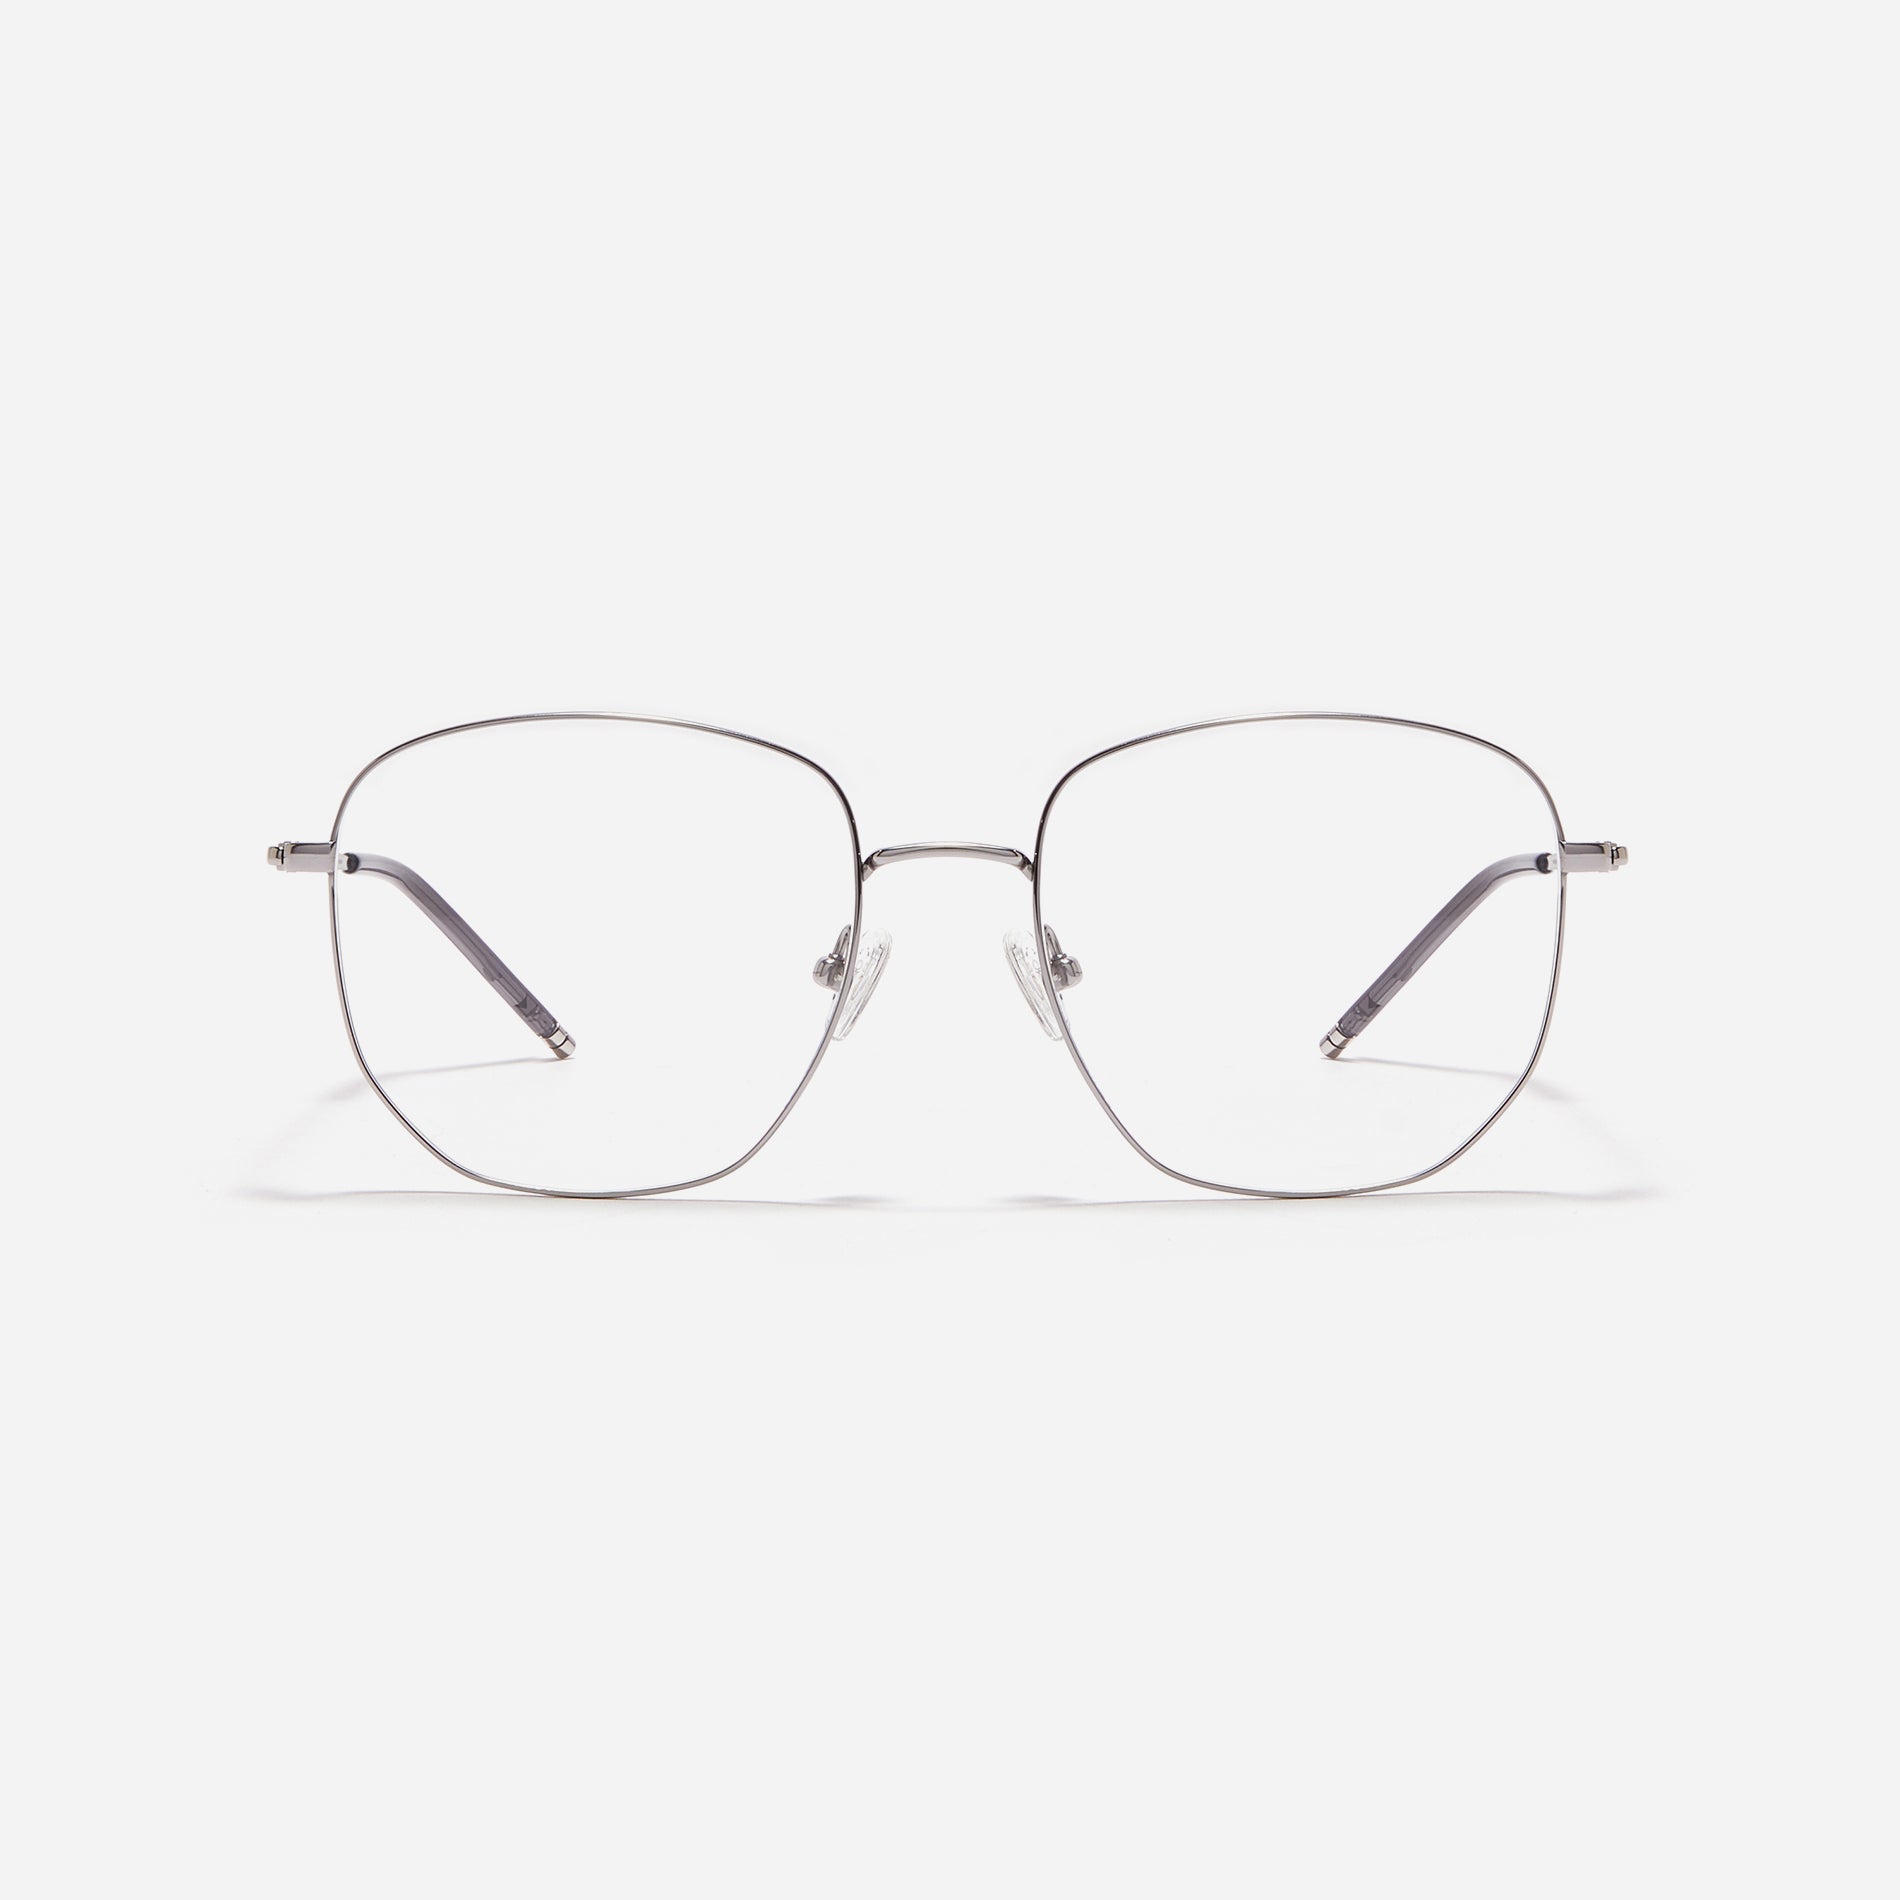 Square-shaped Boeing-style oversized eyeglasses crafted entirely from titanium for a lighter and more comfortable fit. With classic color options and frame design, these eyeglasses offer a retro style that effortlessly complements one's look.